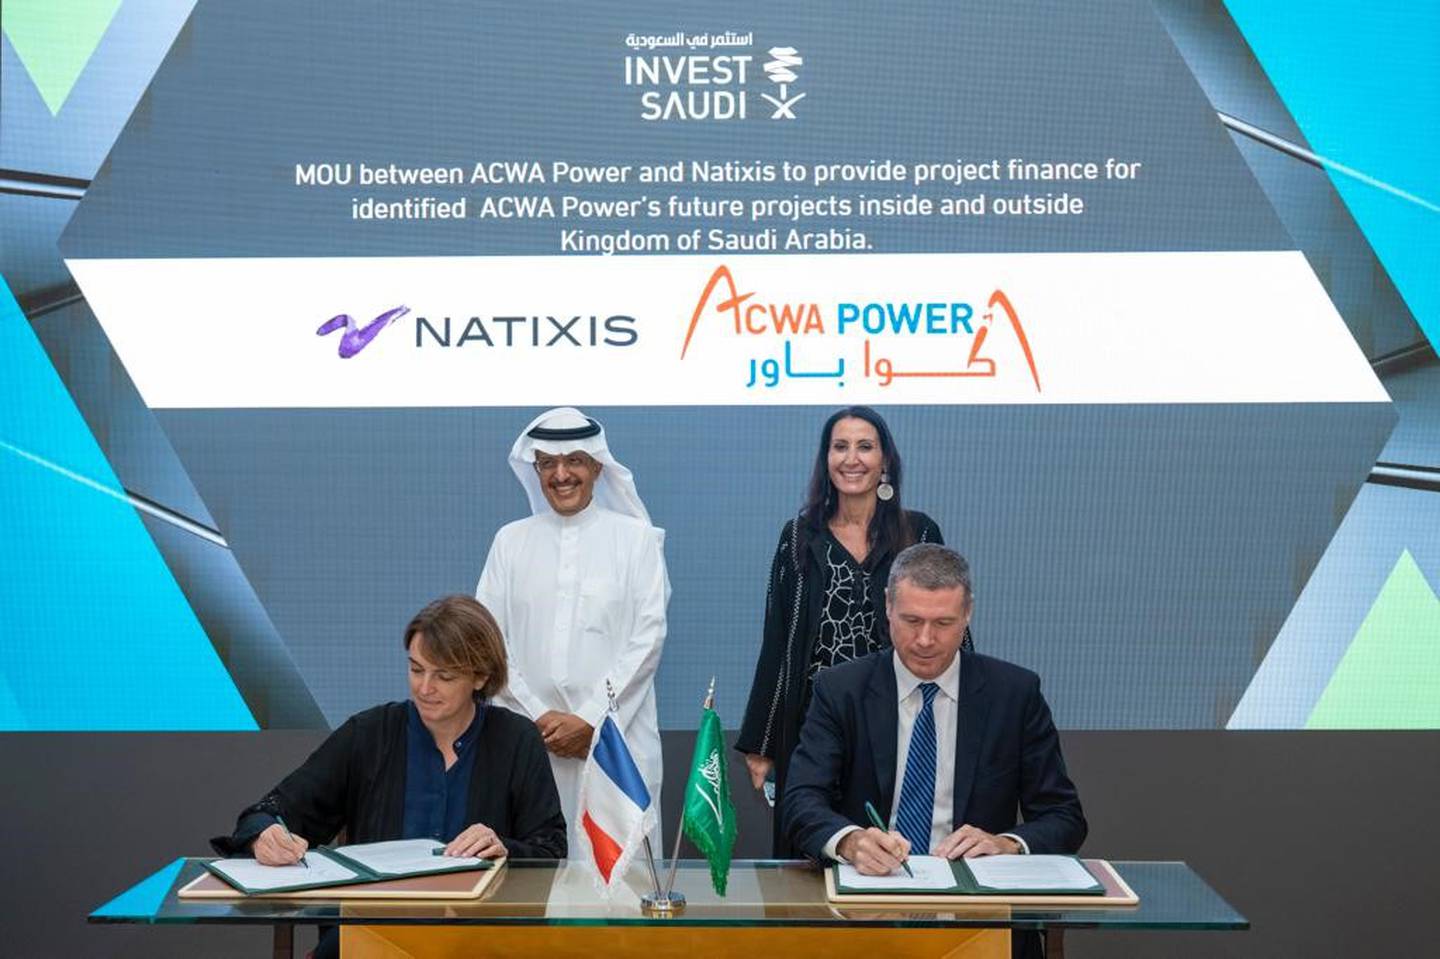 Acwa Power signs a co-operation agreement with Natixis Corporate & Investment Banking to finance new projects. Photo: Acwa Power